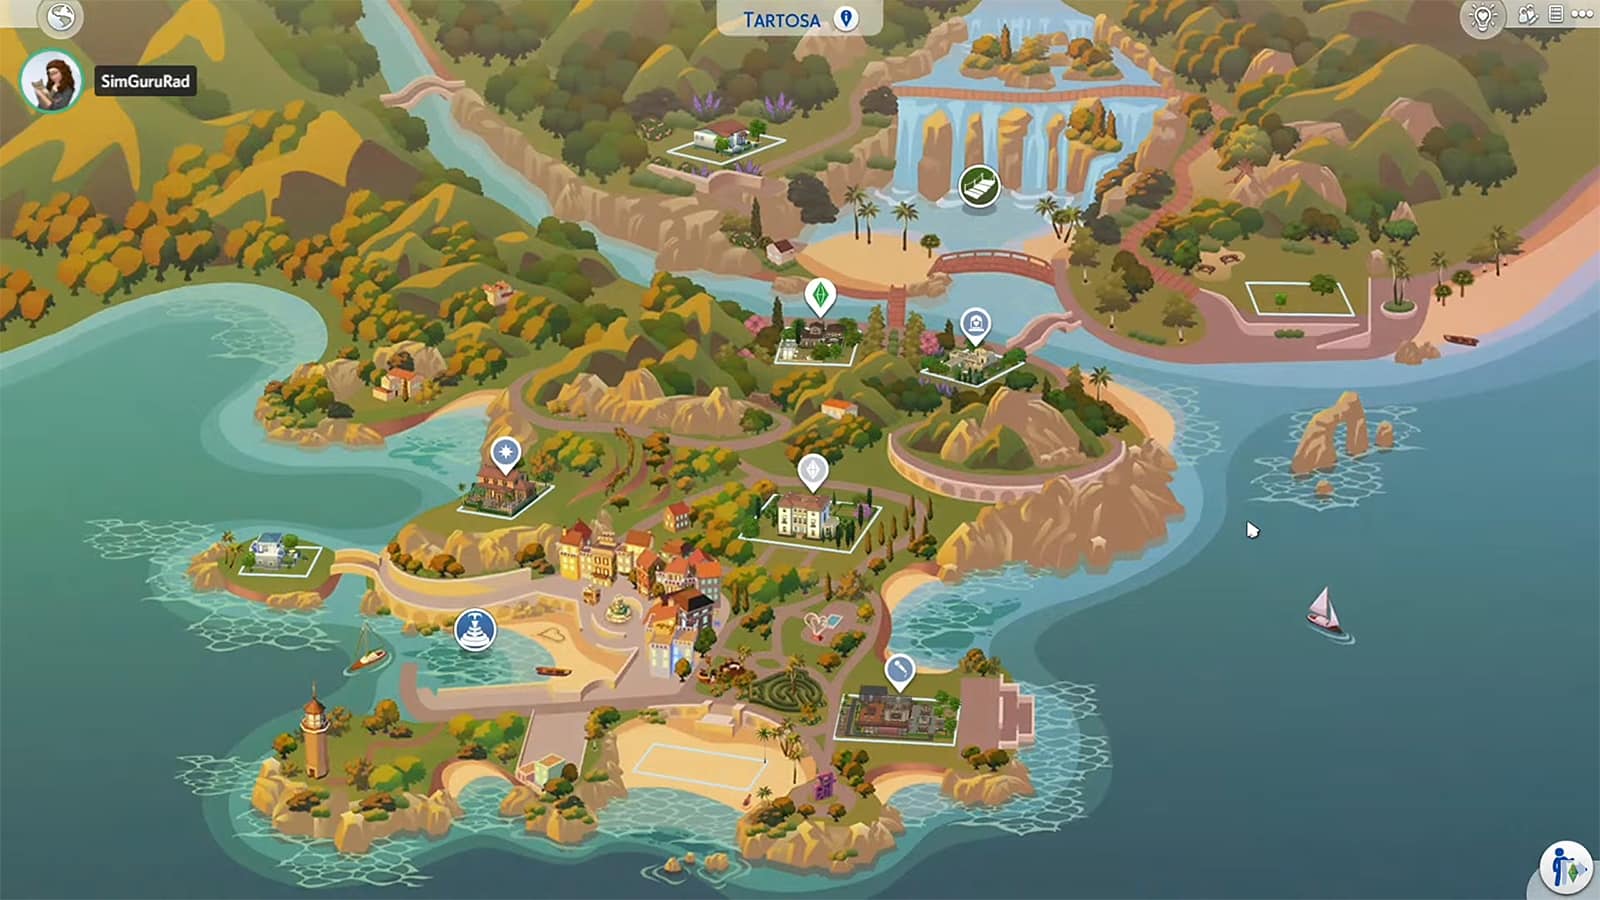 Tartosa world overview in The Sims 4